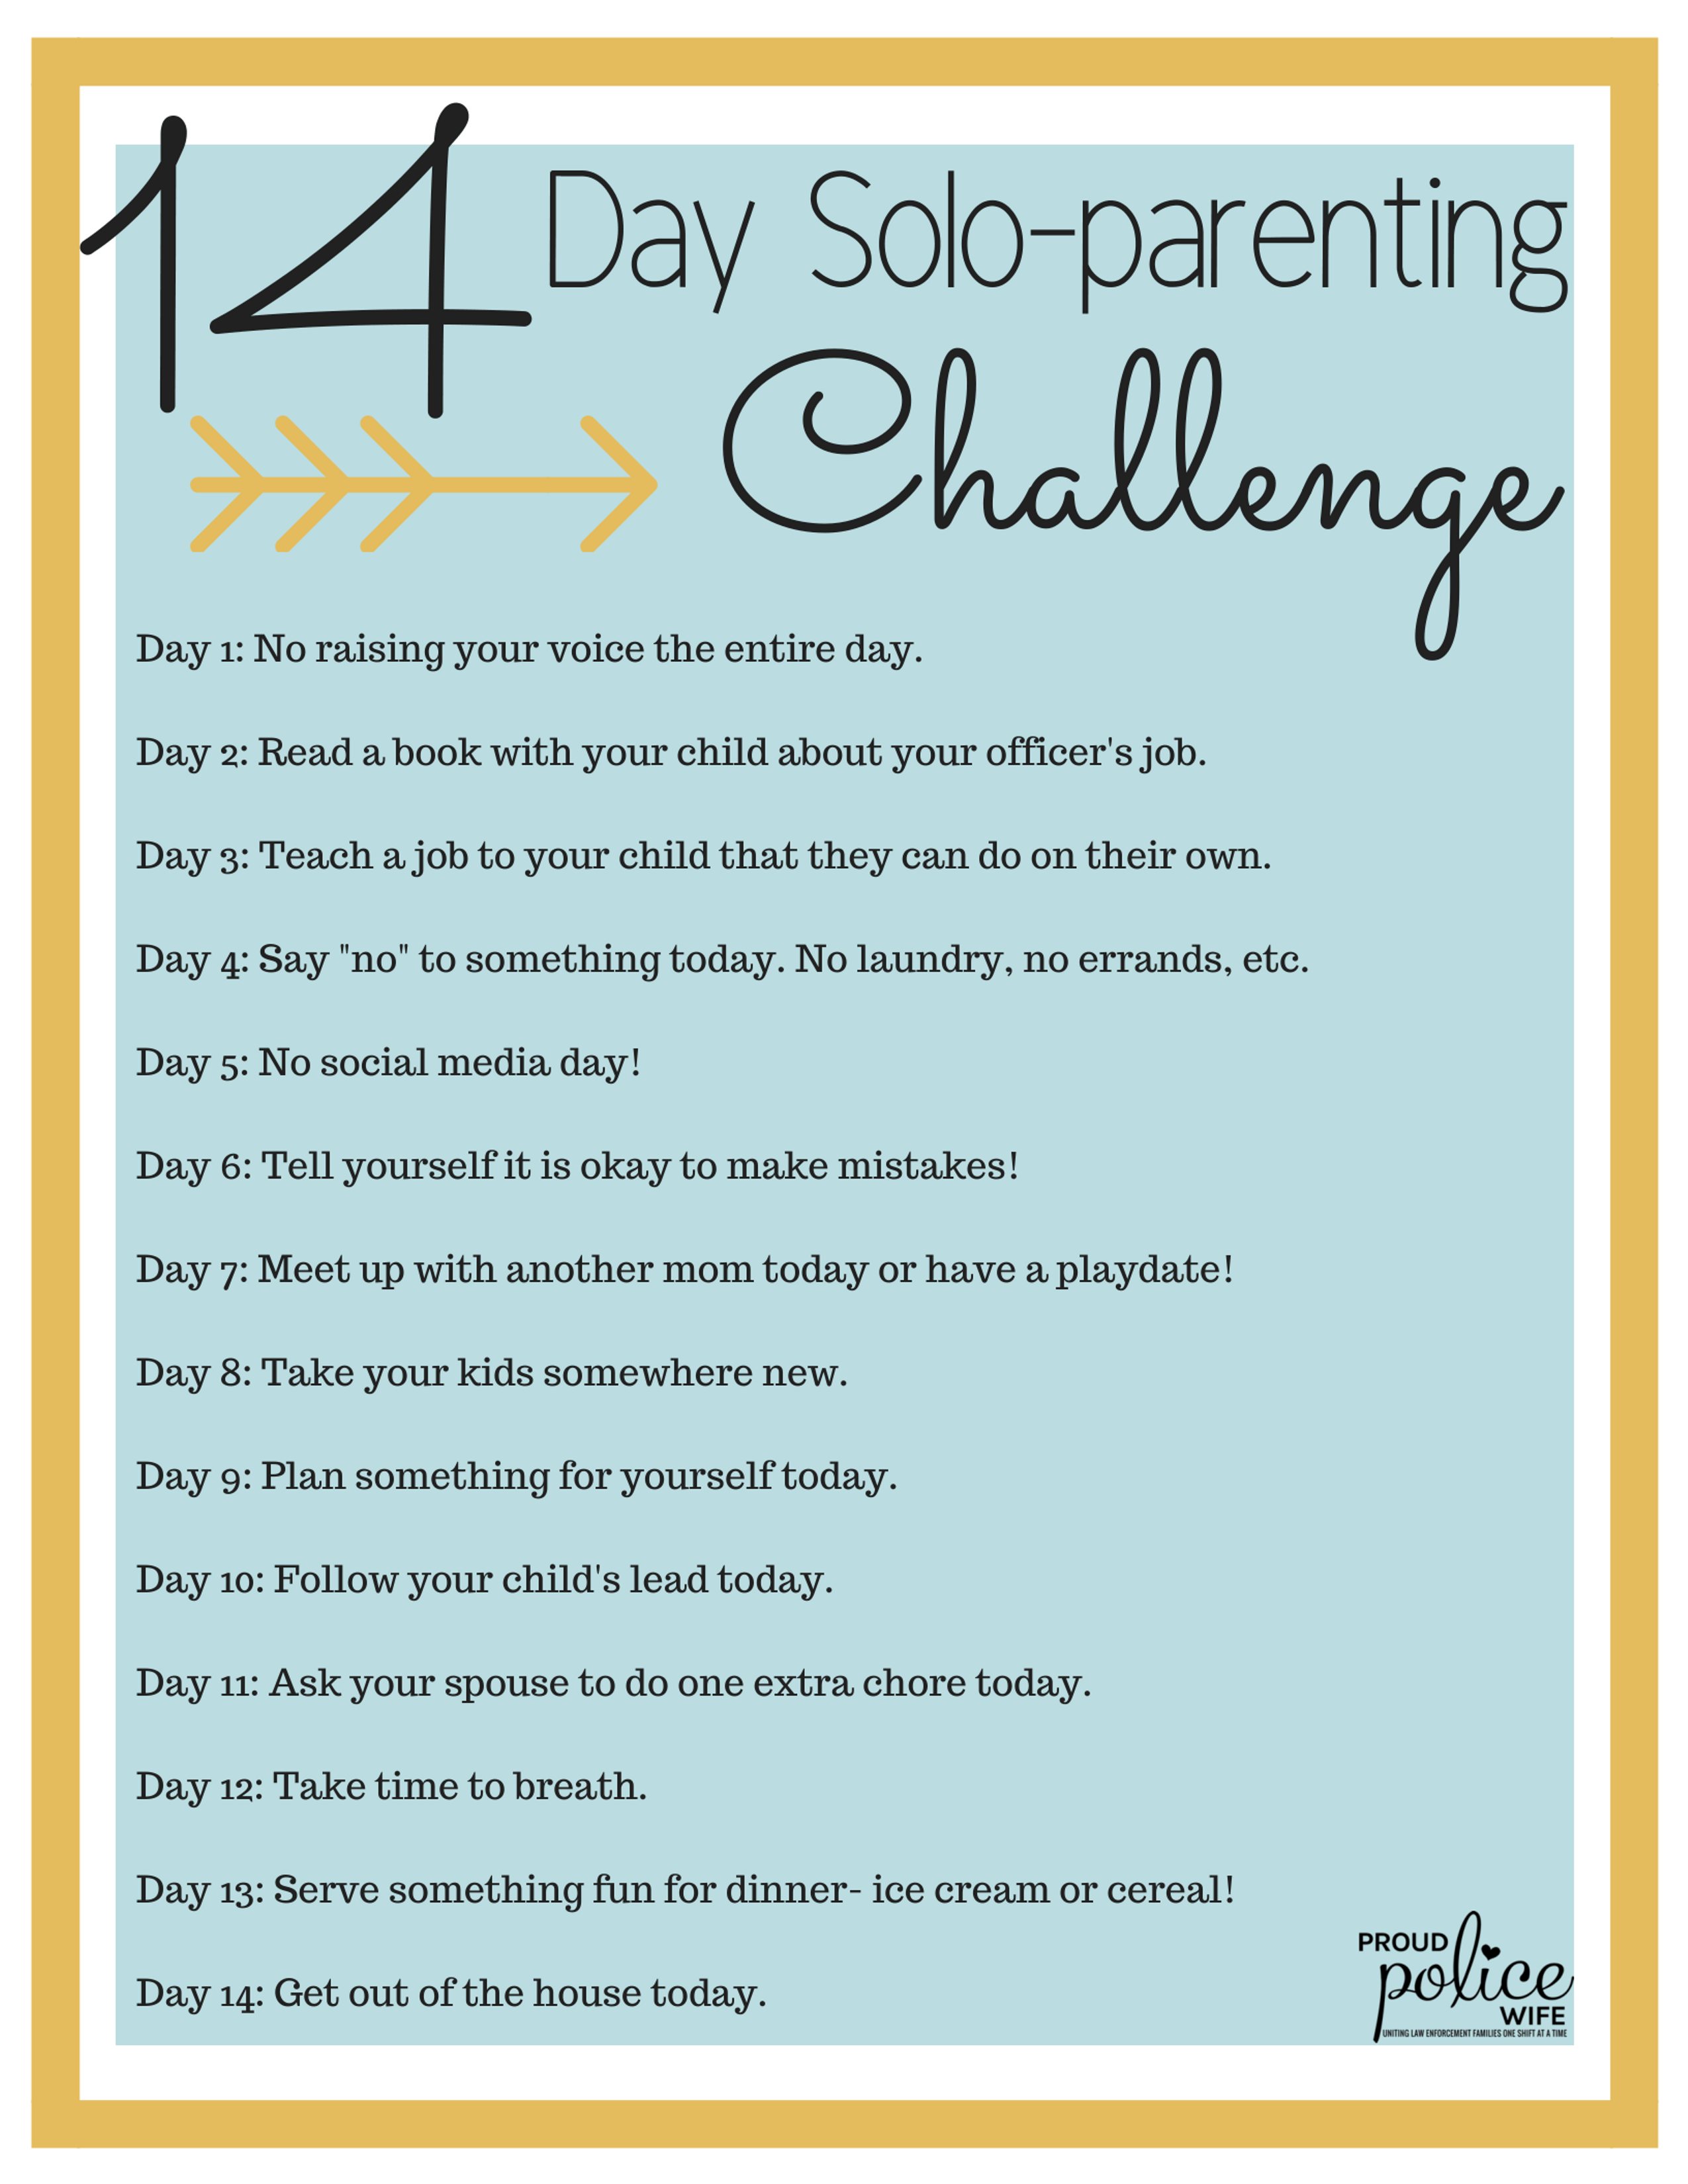 14 Day Solo-Parenting Challenge | #soloparent |#soloparenting |#policewife |#singlemom |#momlife